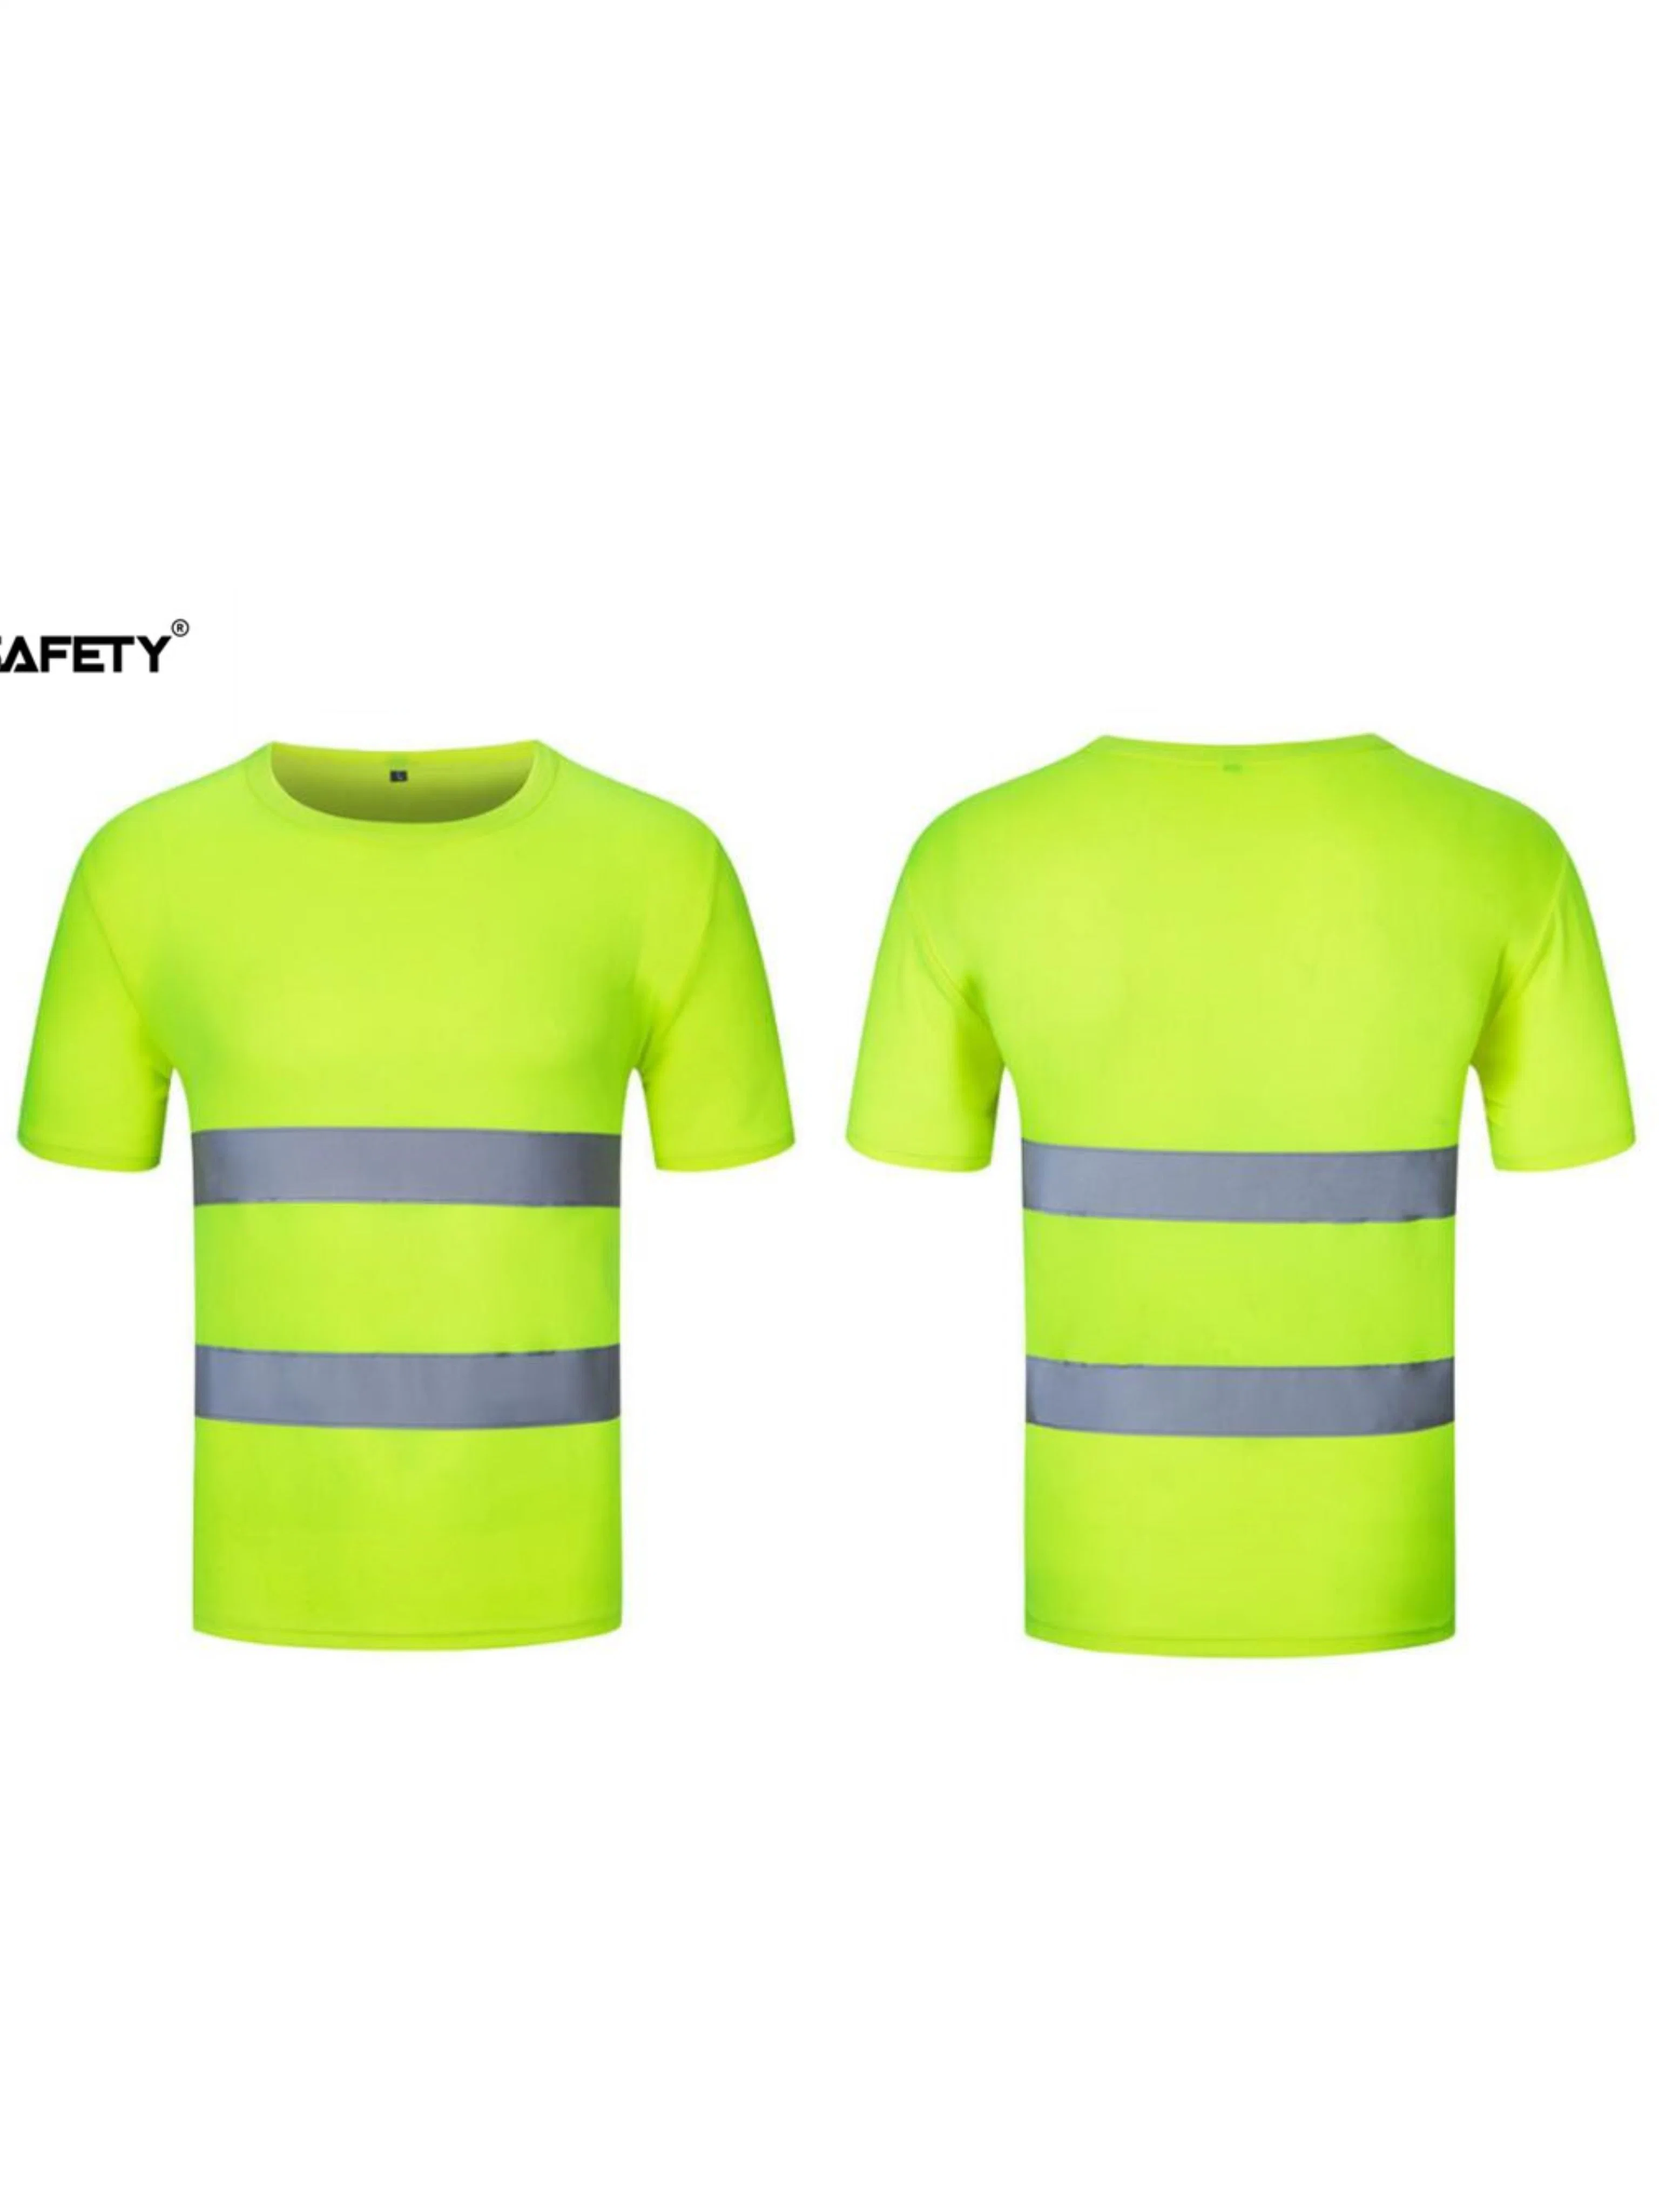 Workwear Reflective Clothing Reflective Polo Shirt with Long Sleeves 100% Cotton